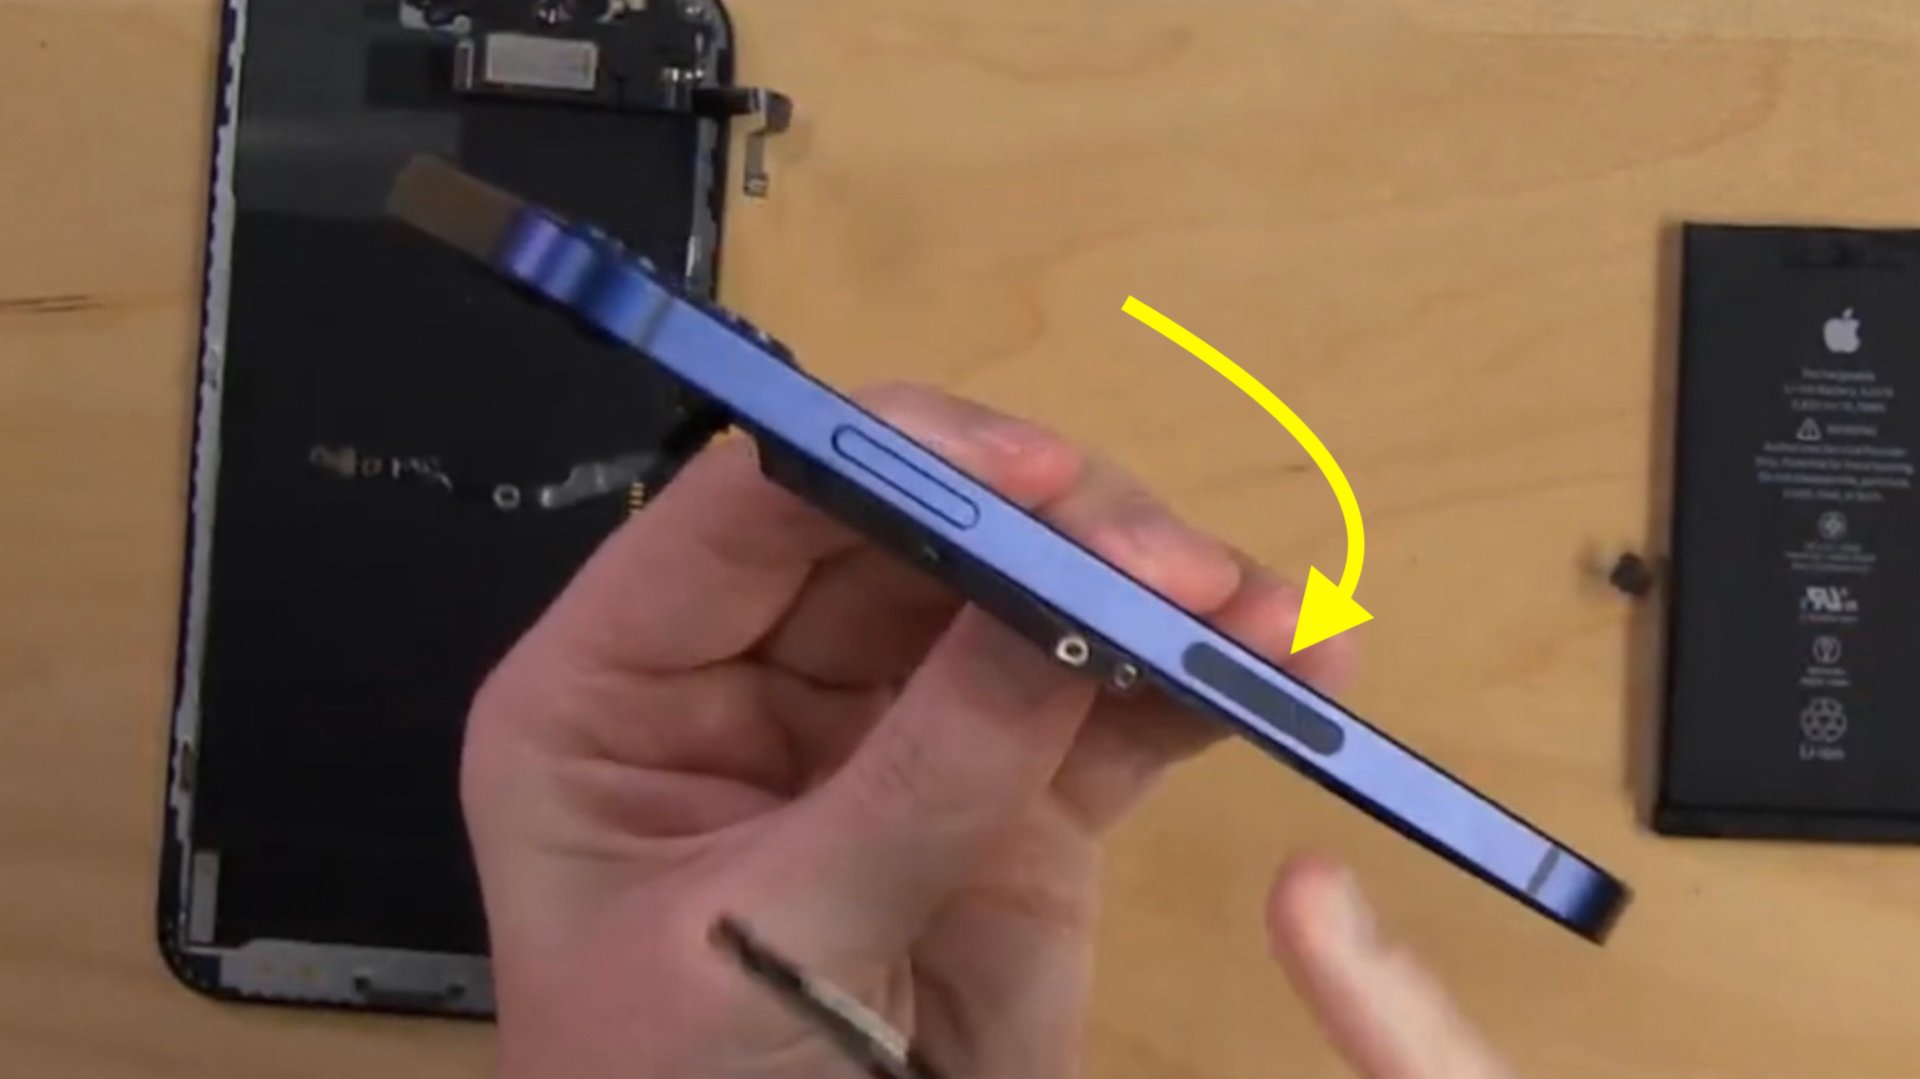 Apple iPhone 12 Has An Unidentified Side Panel: Mystery Solved